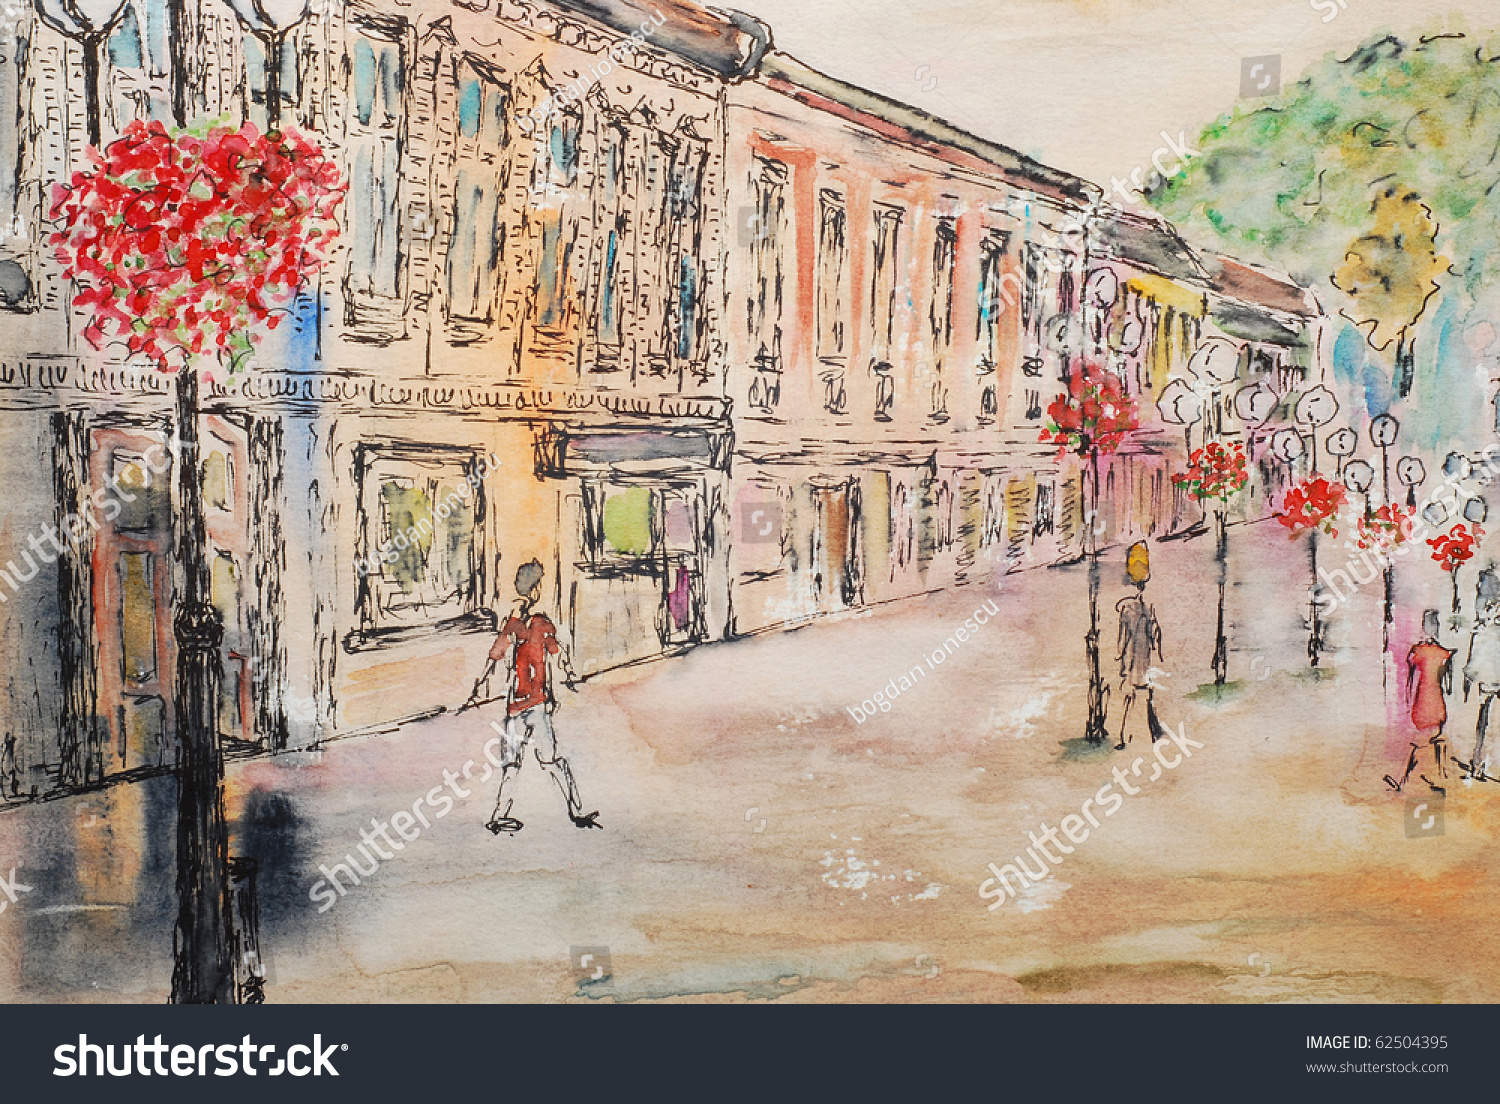 Watercolor Painting, Urban Landscape Stock Photo 62504395 : Shutterstock